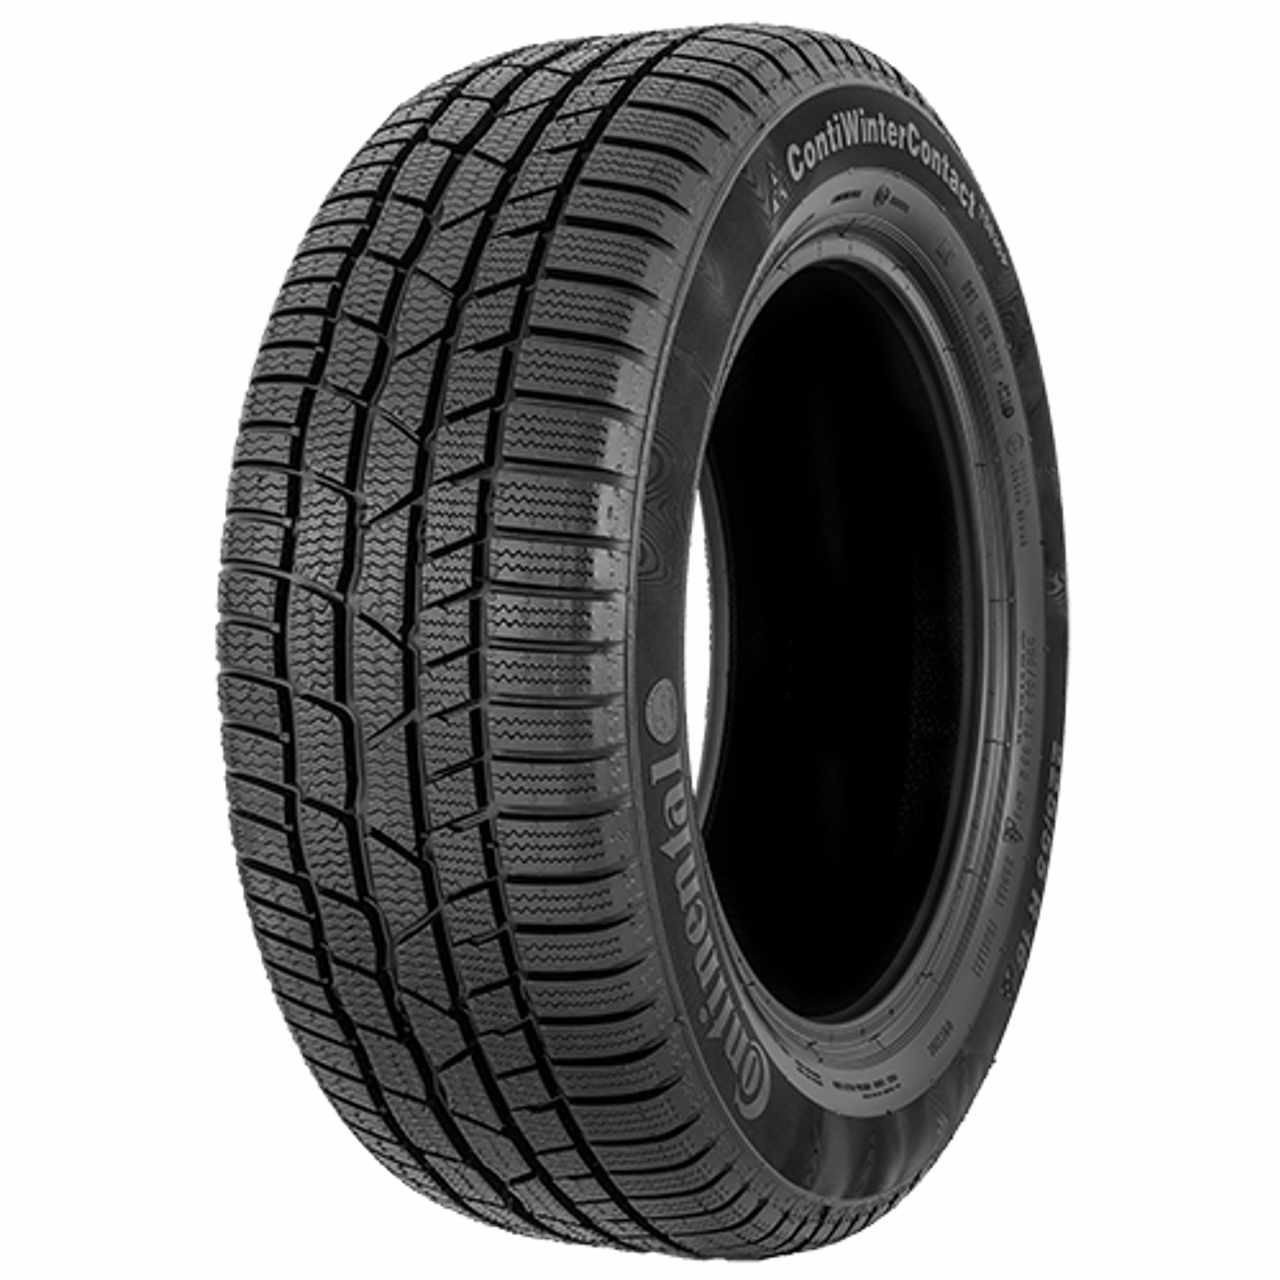 CONTINENTAL CONTIWINTERCONTACT TS 830 P 205/60R16 96H